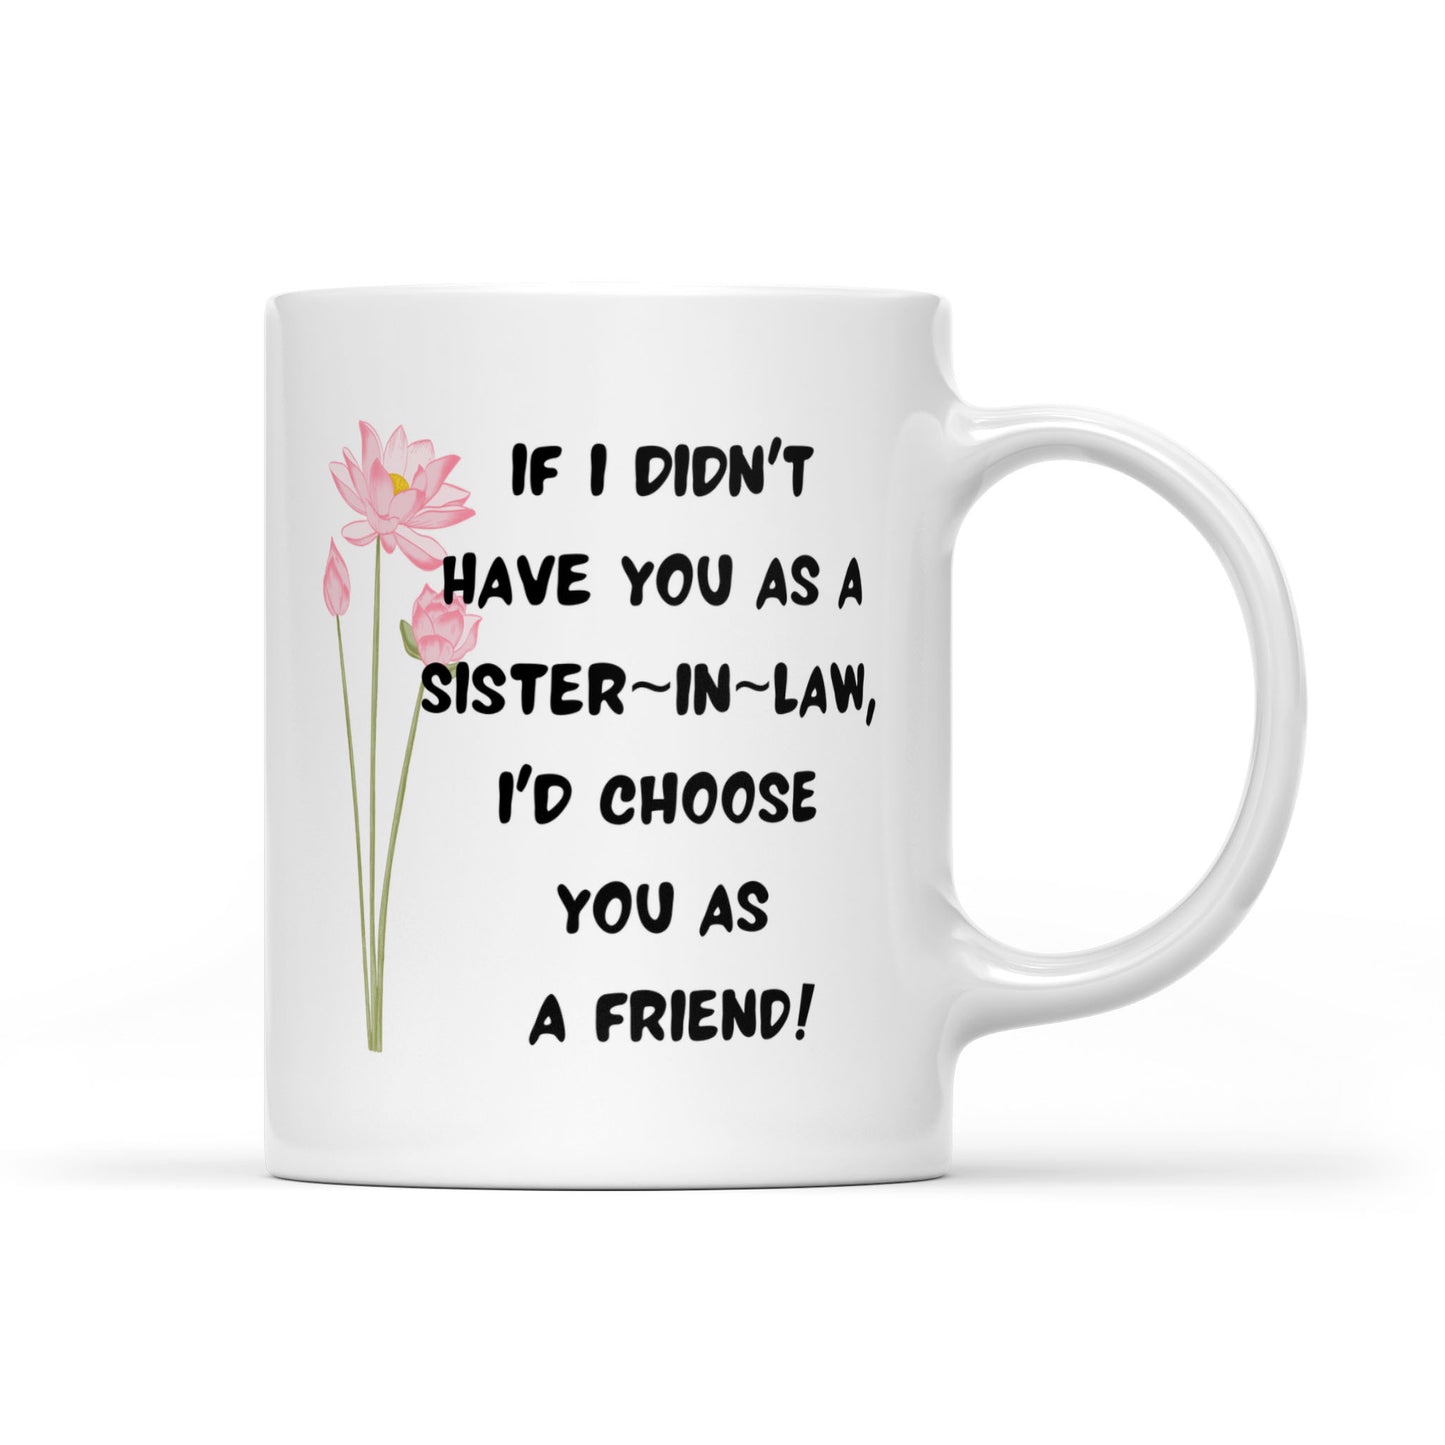 Best Sister In Law Mugs For Her Special Day